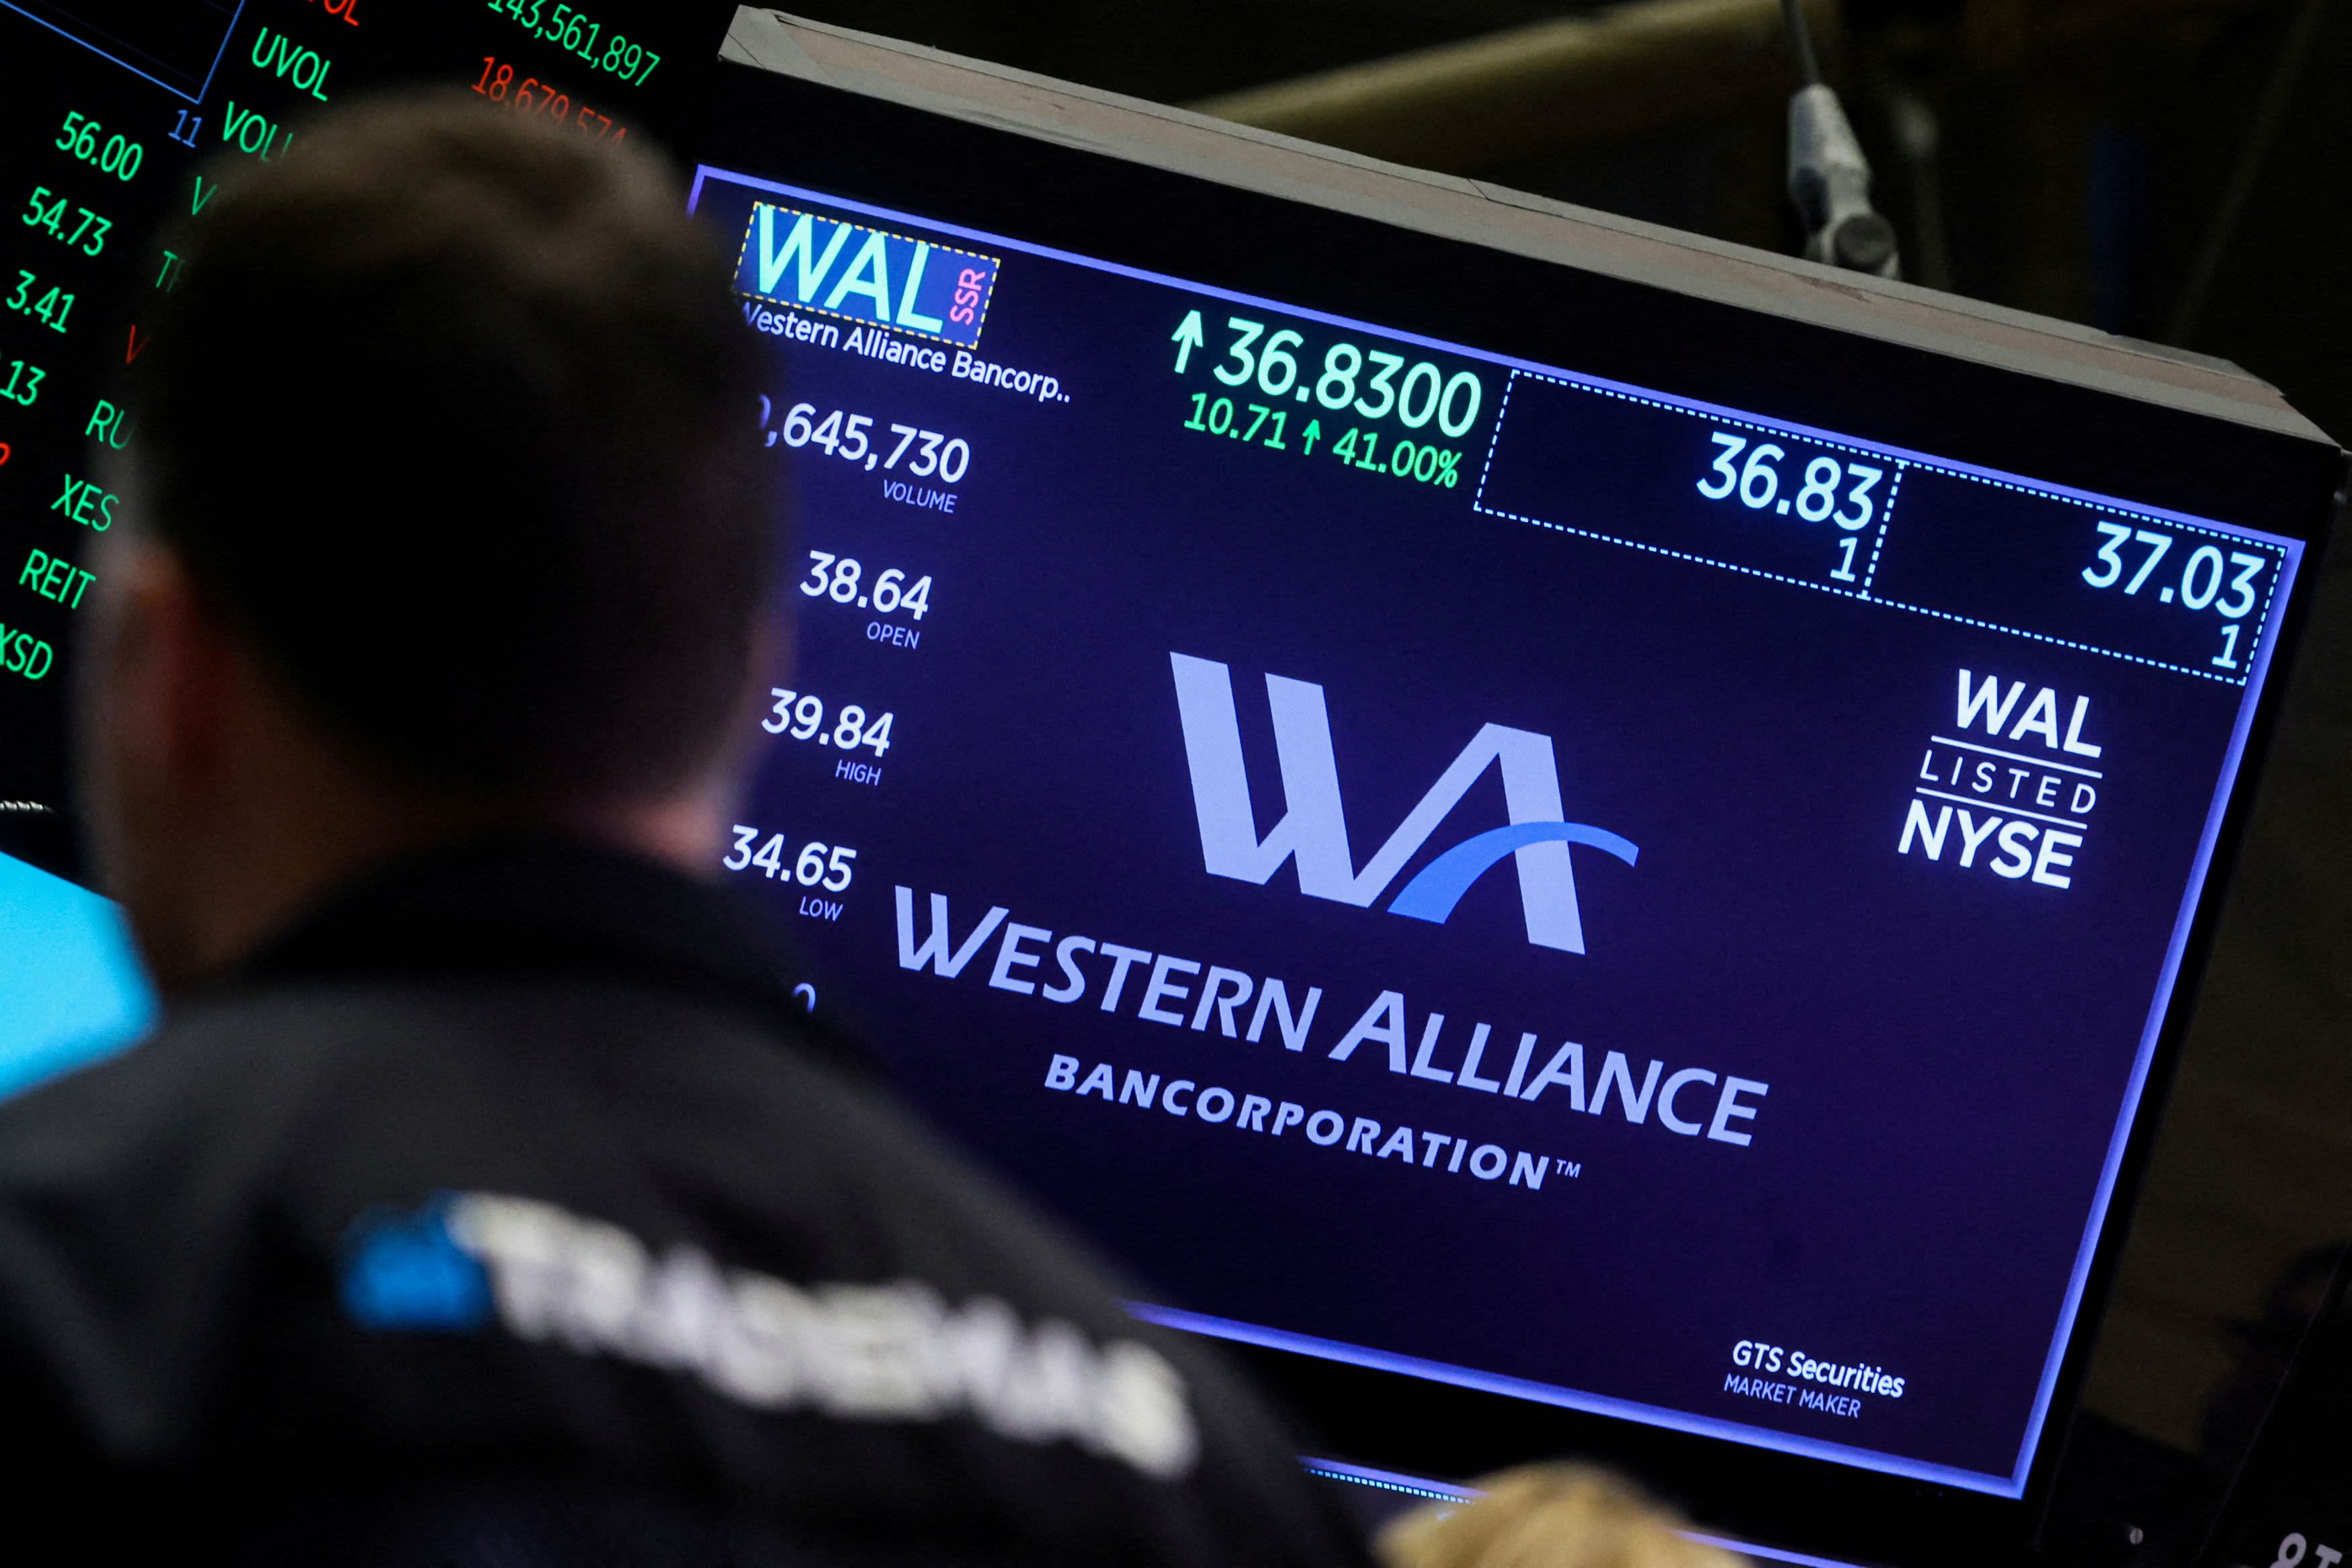 Bank of America recommends buying Western Alliance because it's not like the three failed banks, shares up more than 30%